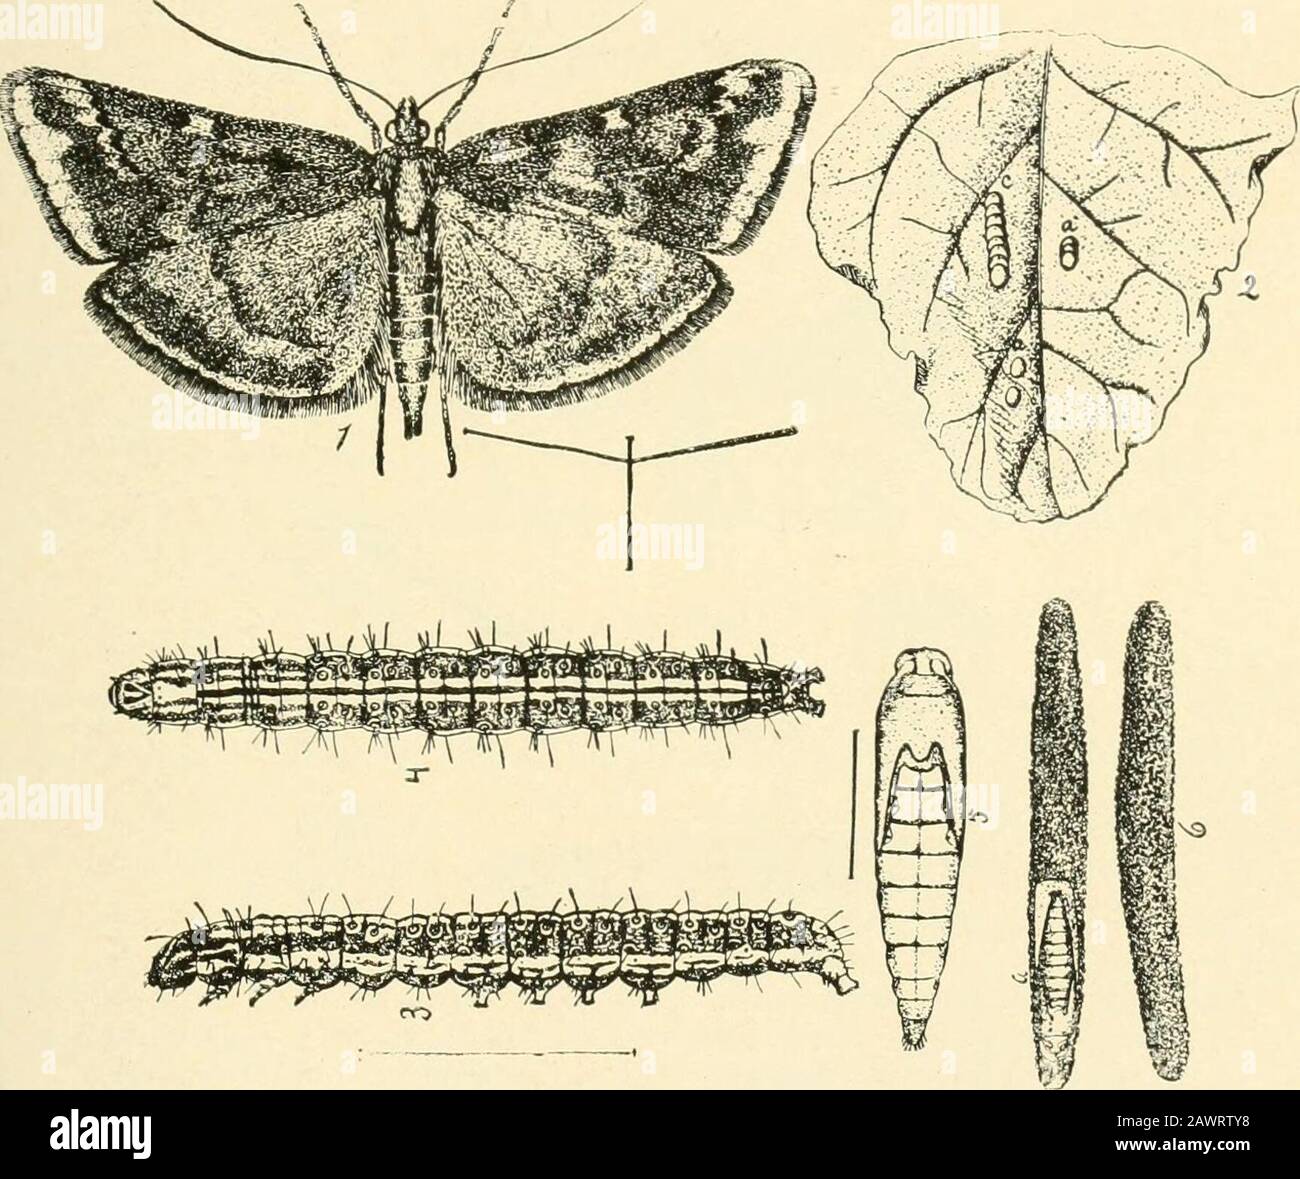 Insect pests of farm, garden and orchard . bum) and careless weed {A mnranthus) and will probably feedon many other crops. It is a native of western and centralEurope, and northern Asia, and was evidently introduced on thePacific Coast, as it was noted in Utah in 1869. The moth is larger than the garden webworm, having a wingexpanse of an inch, and is a purpHsh-brown color with darkerand paler bands as shown in Fig. 239. The -full-grown larva isabout an inch long, of a dark color with a white stripe down the * Loxostege sticticalis Linn. P^amily Pyraustidae. See C. P. Gillette,Bulletin 98, Col Stock Photo